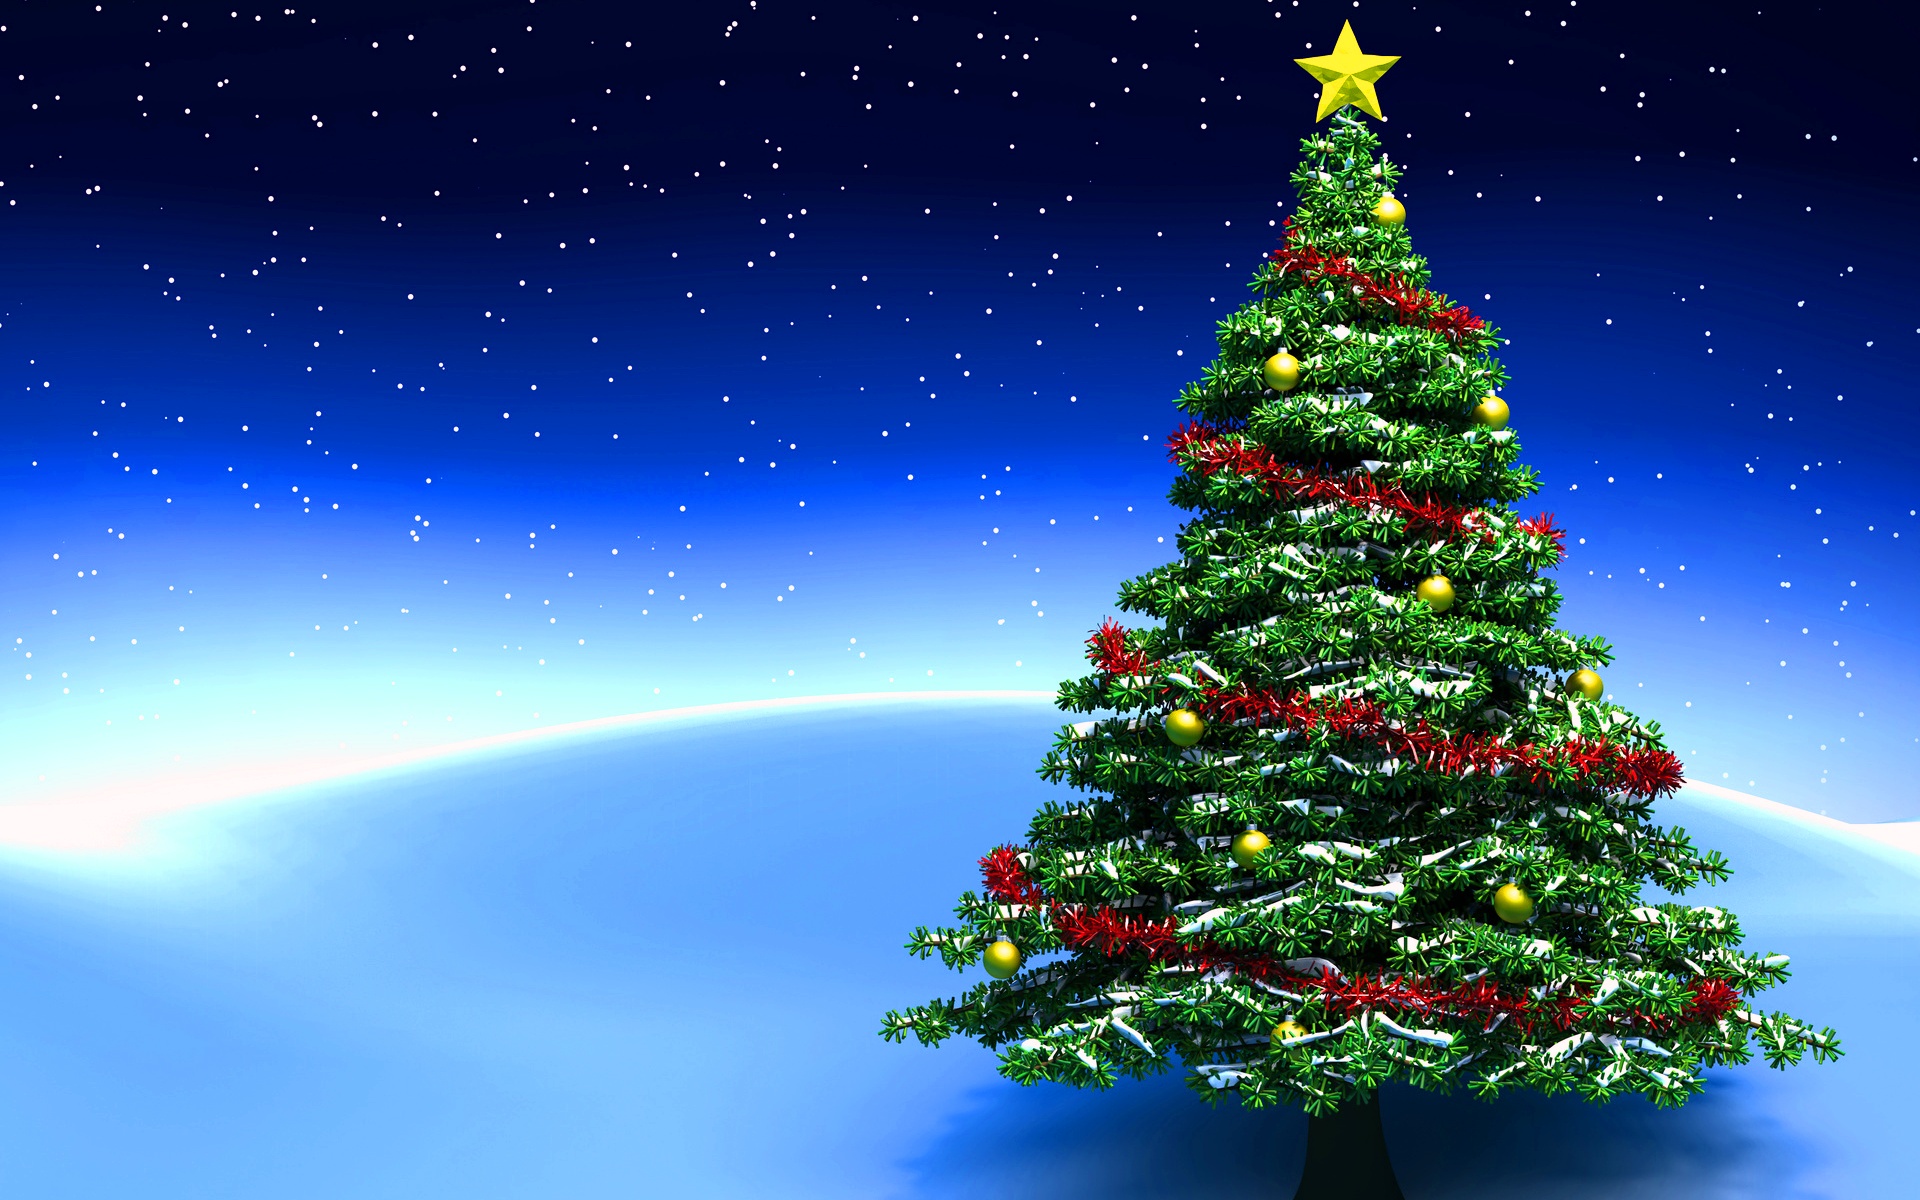 Wallpapers christmas tree new year decorations holiday on the desktop